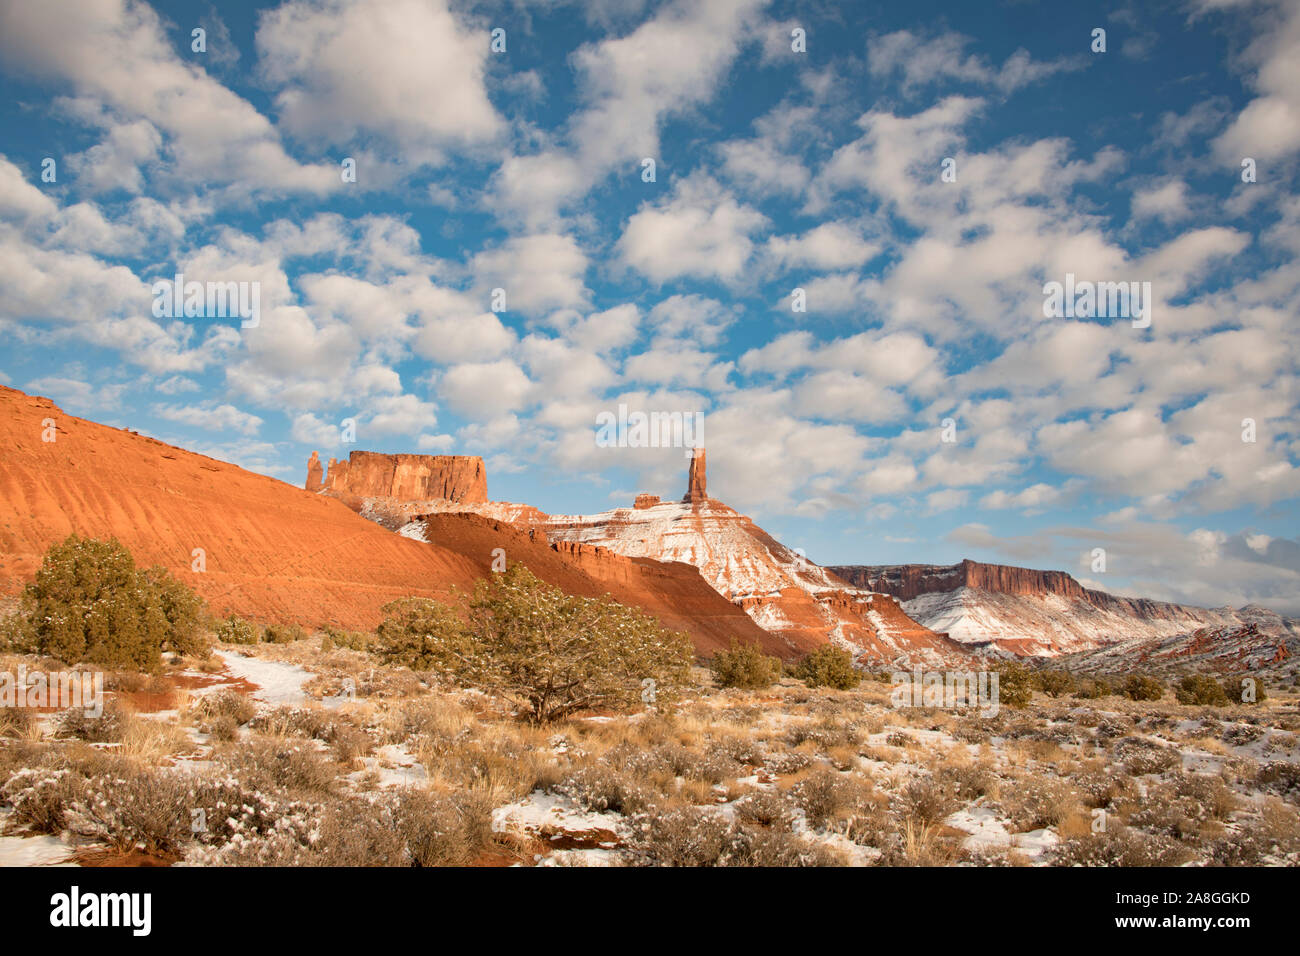 Clouds and snow at Castle Rock, proposed La Sa Waters Wilderenss, Utah, Castle Valley, Colorado River near Moab, Utah Stock Photo